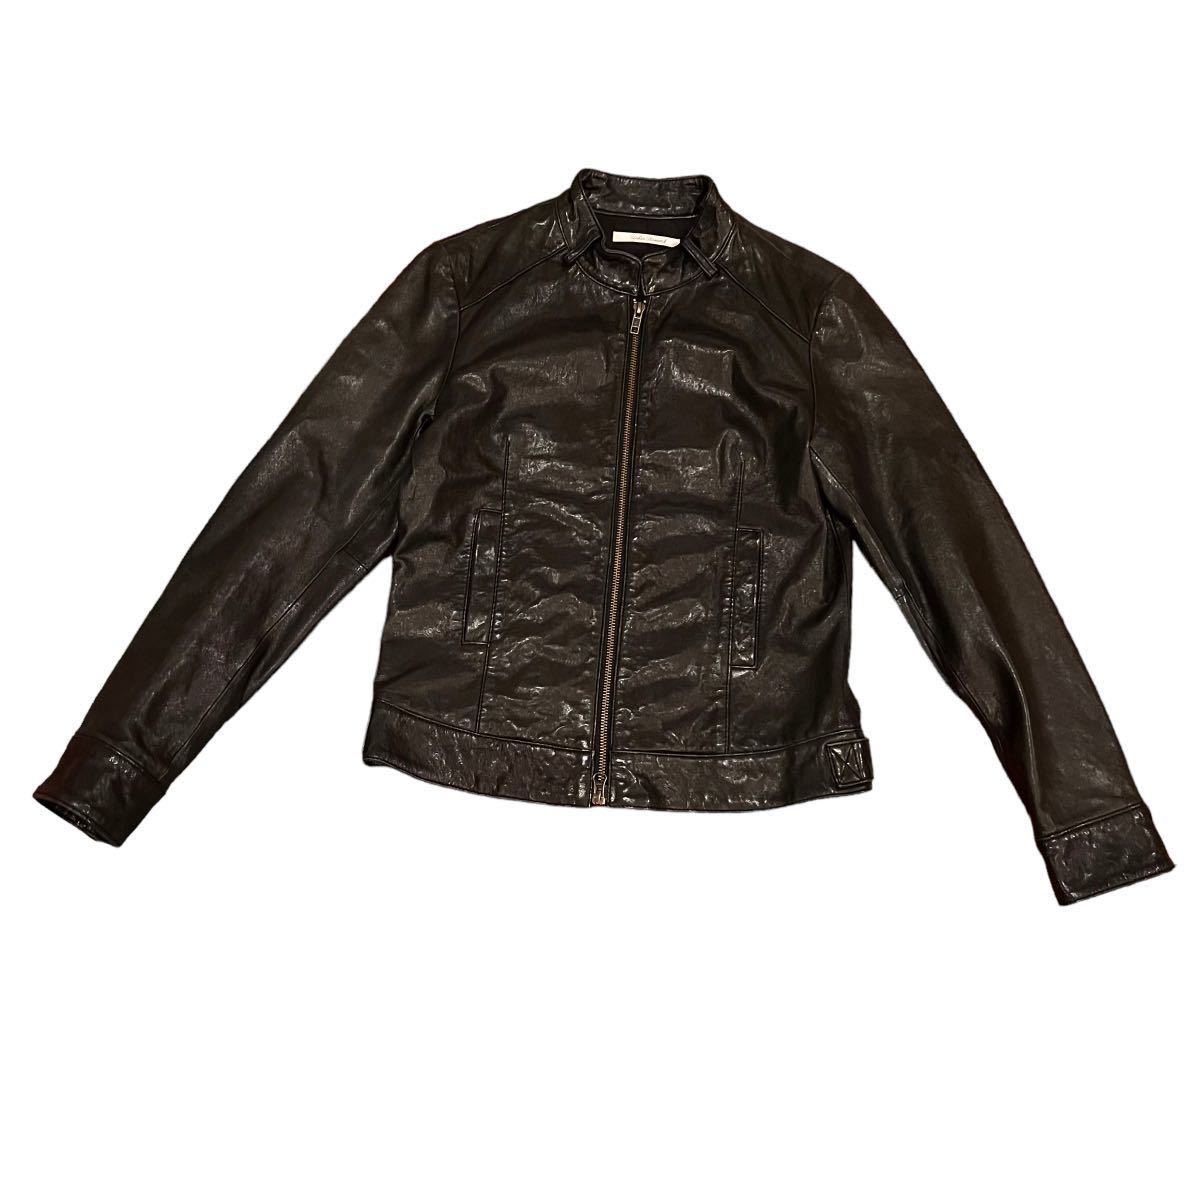 URBAN RESERCH Urban Research leather jacket ram leather sheep leather Single Rider's soft black lady's F size [AY1502]